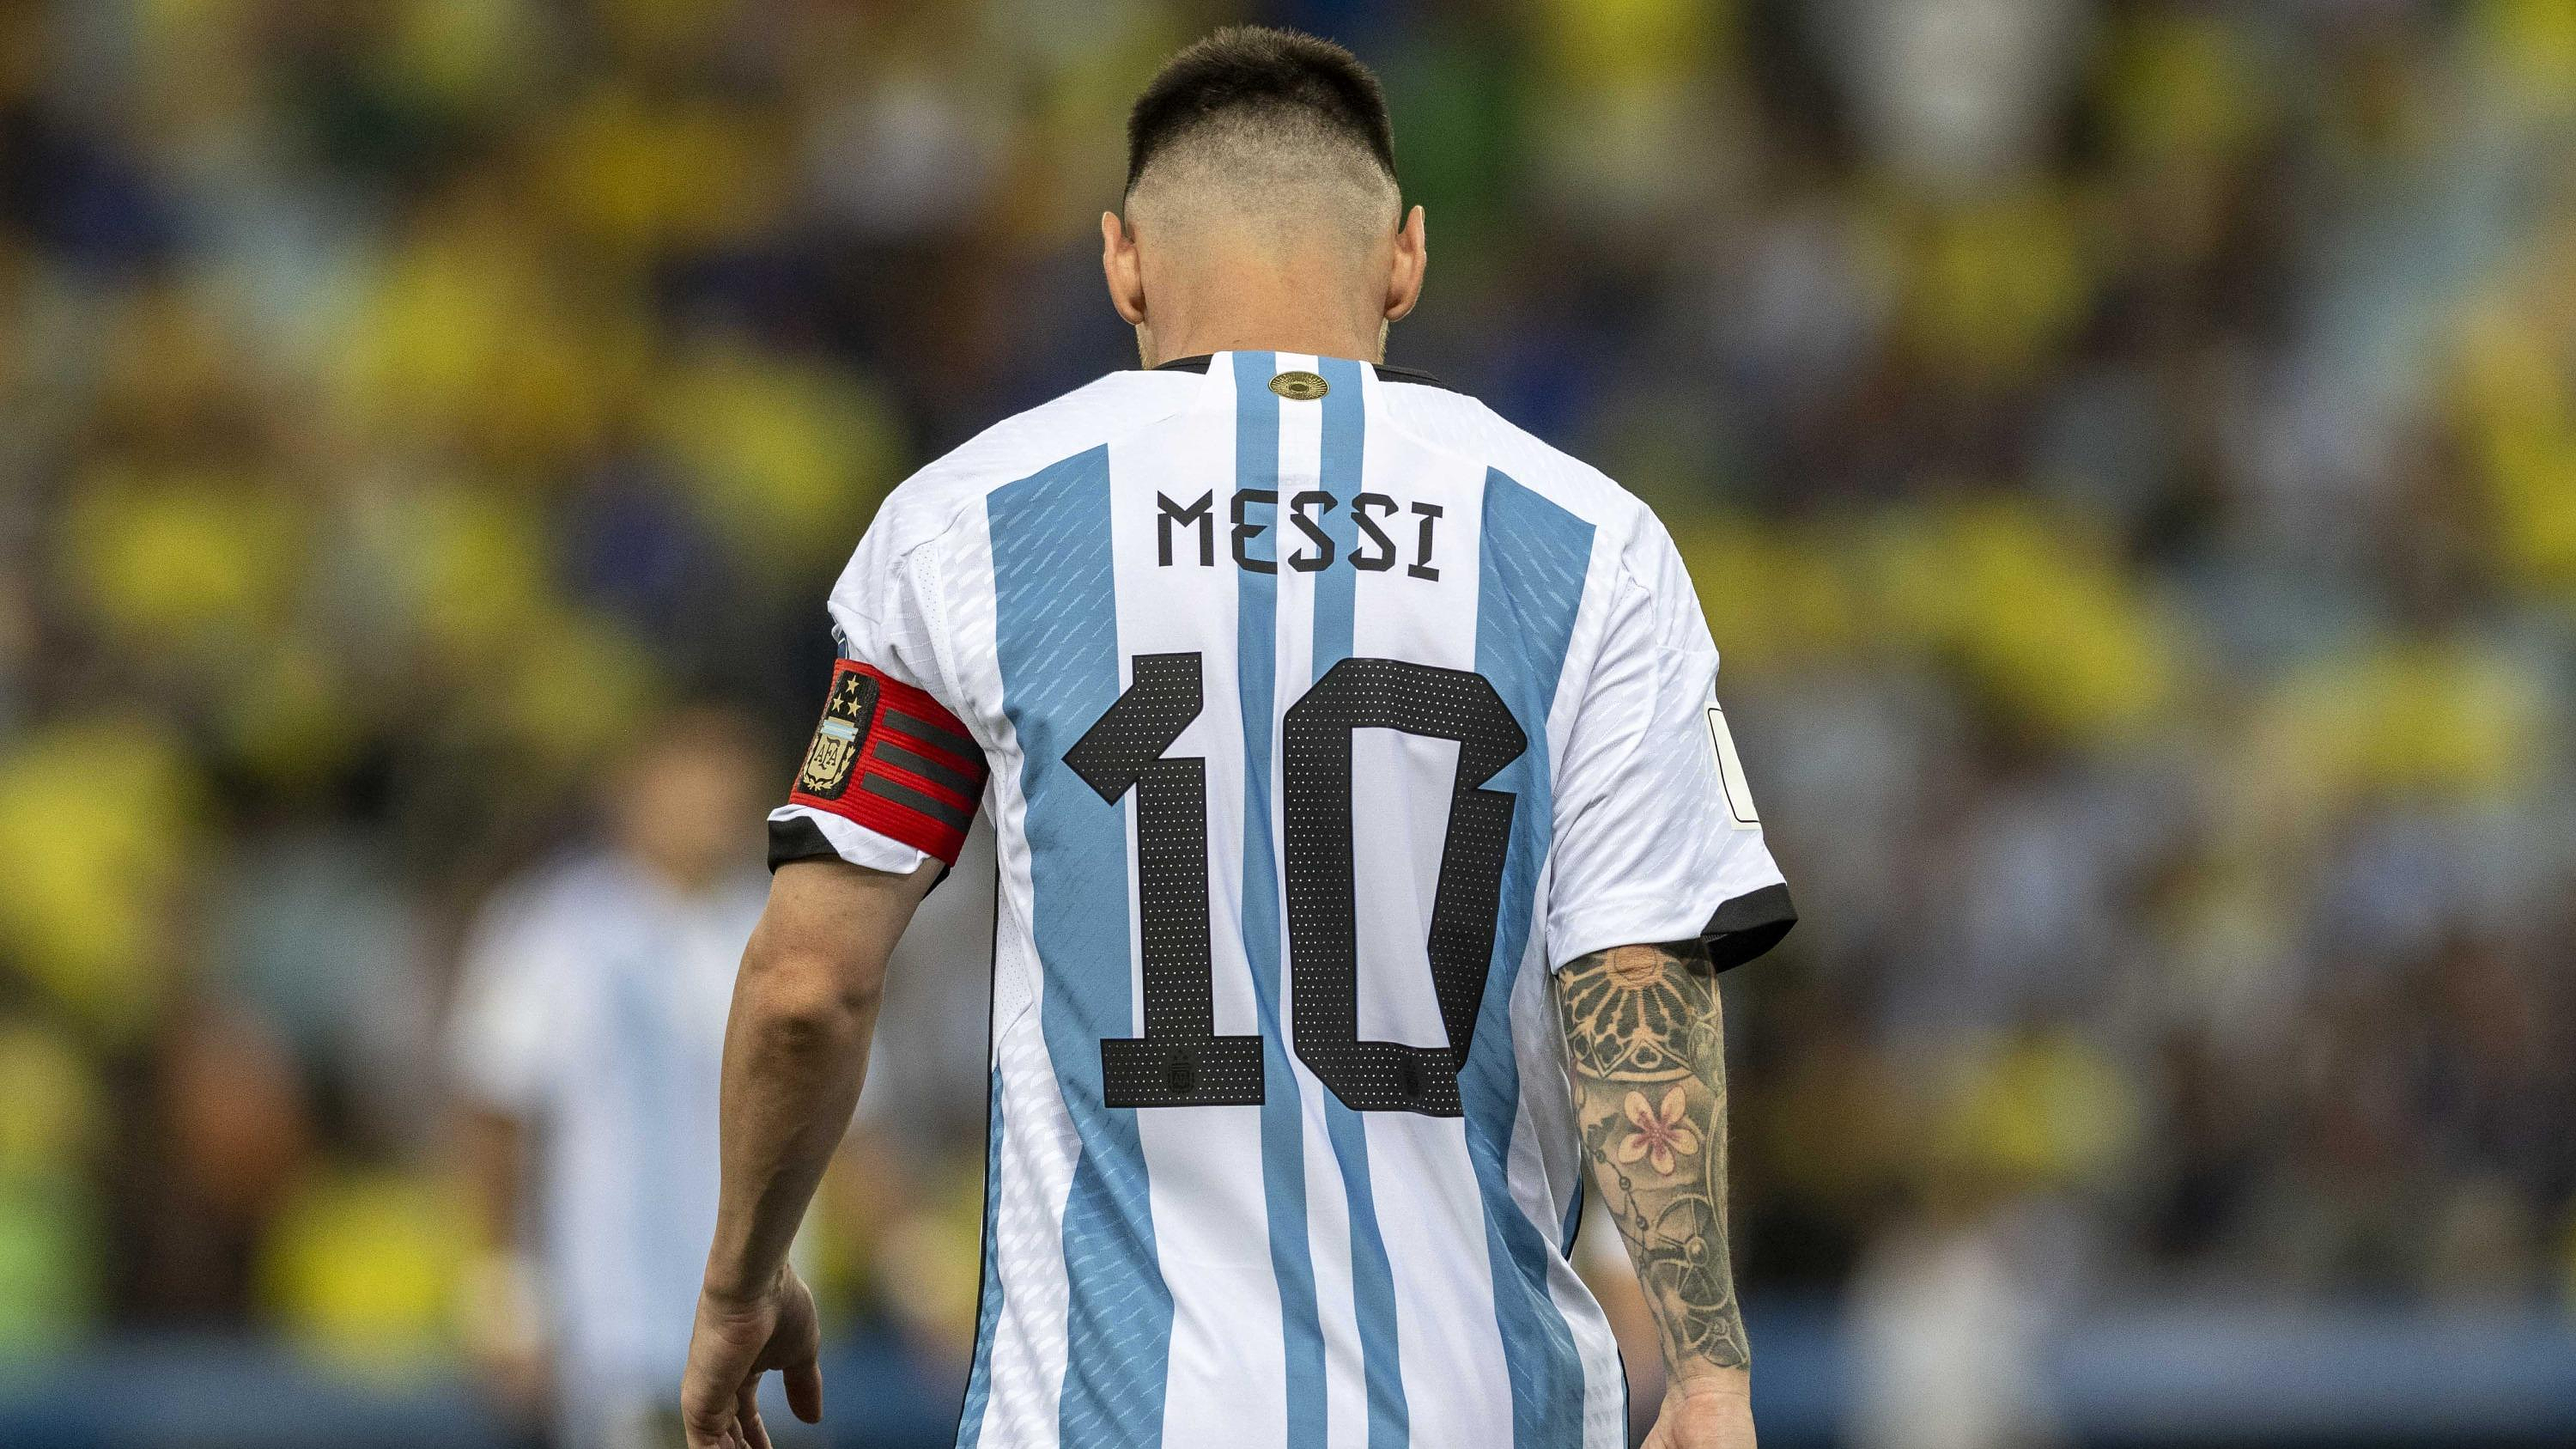 Football: injured, Lionel Messi uncertain for Argentina's next two matches